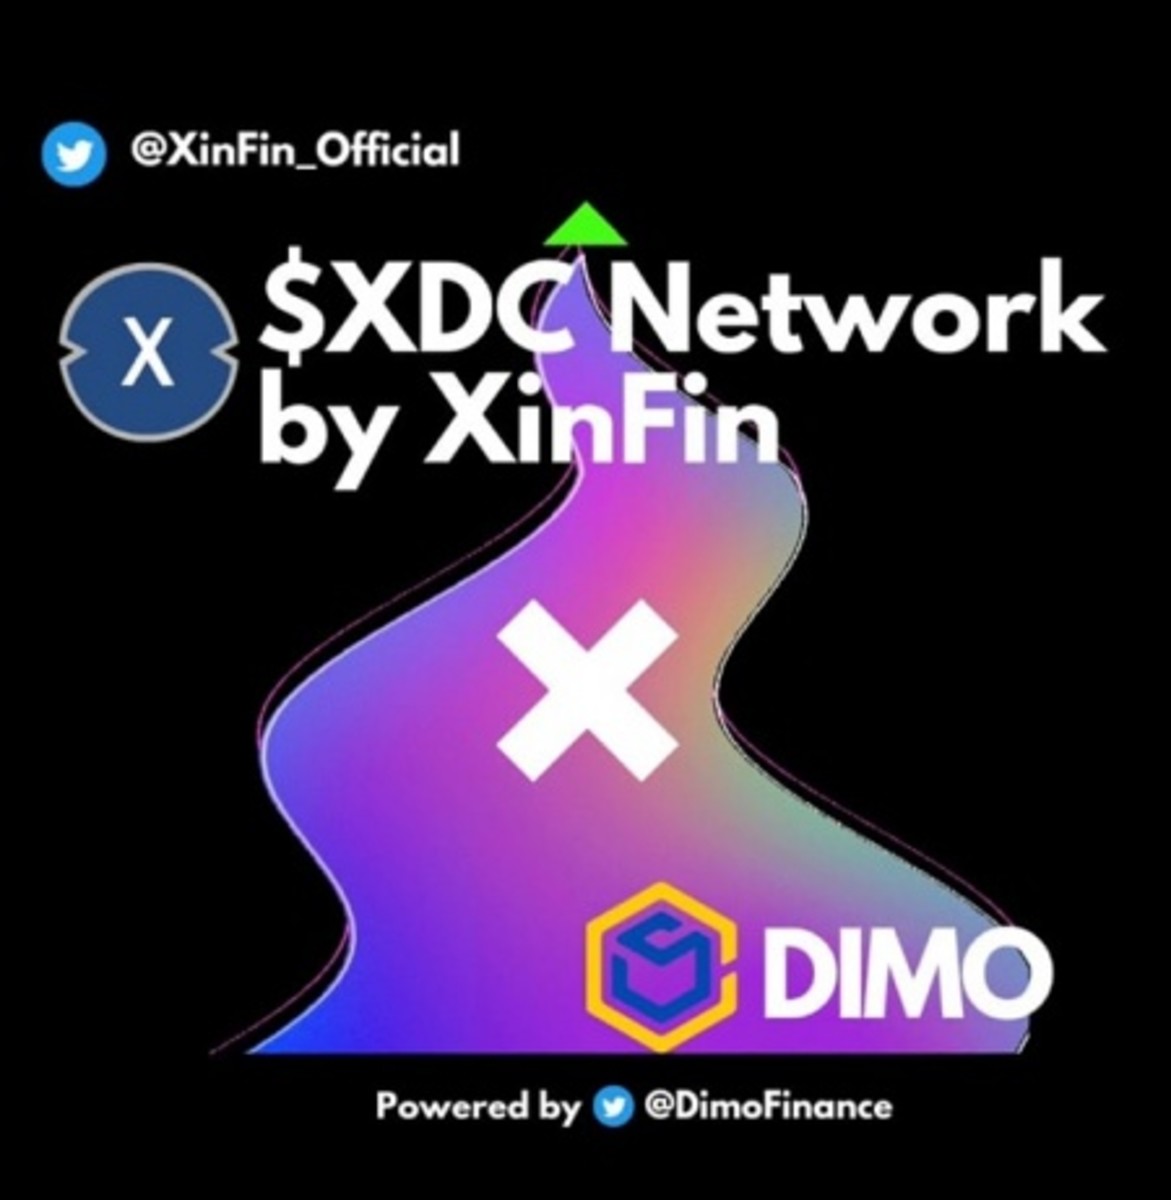 DIMO and XinFin